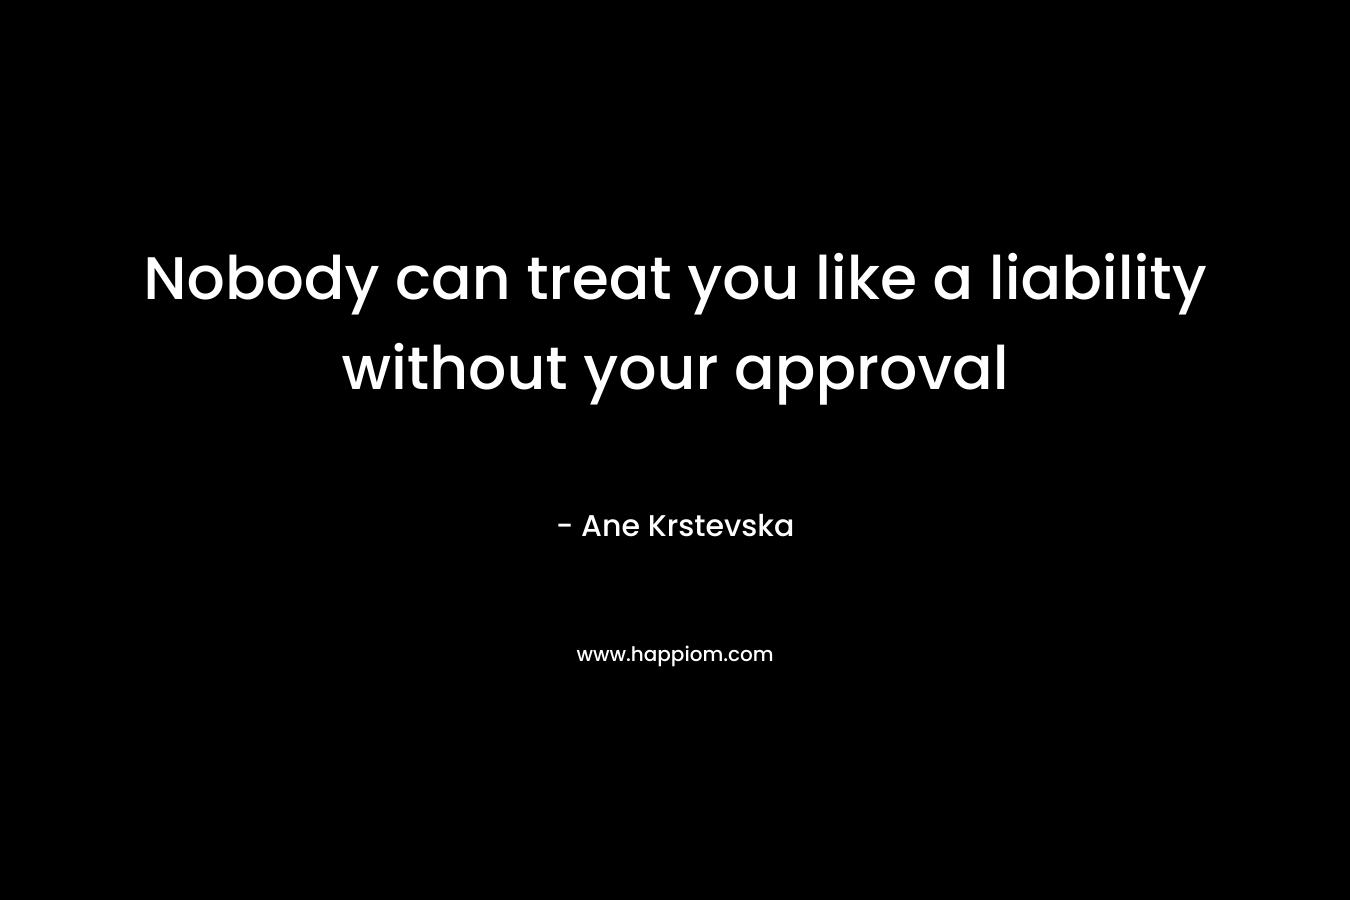 Nobody can treat you like a liability without your approval